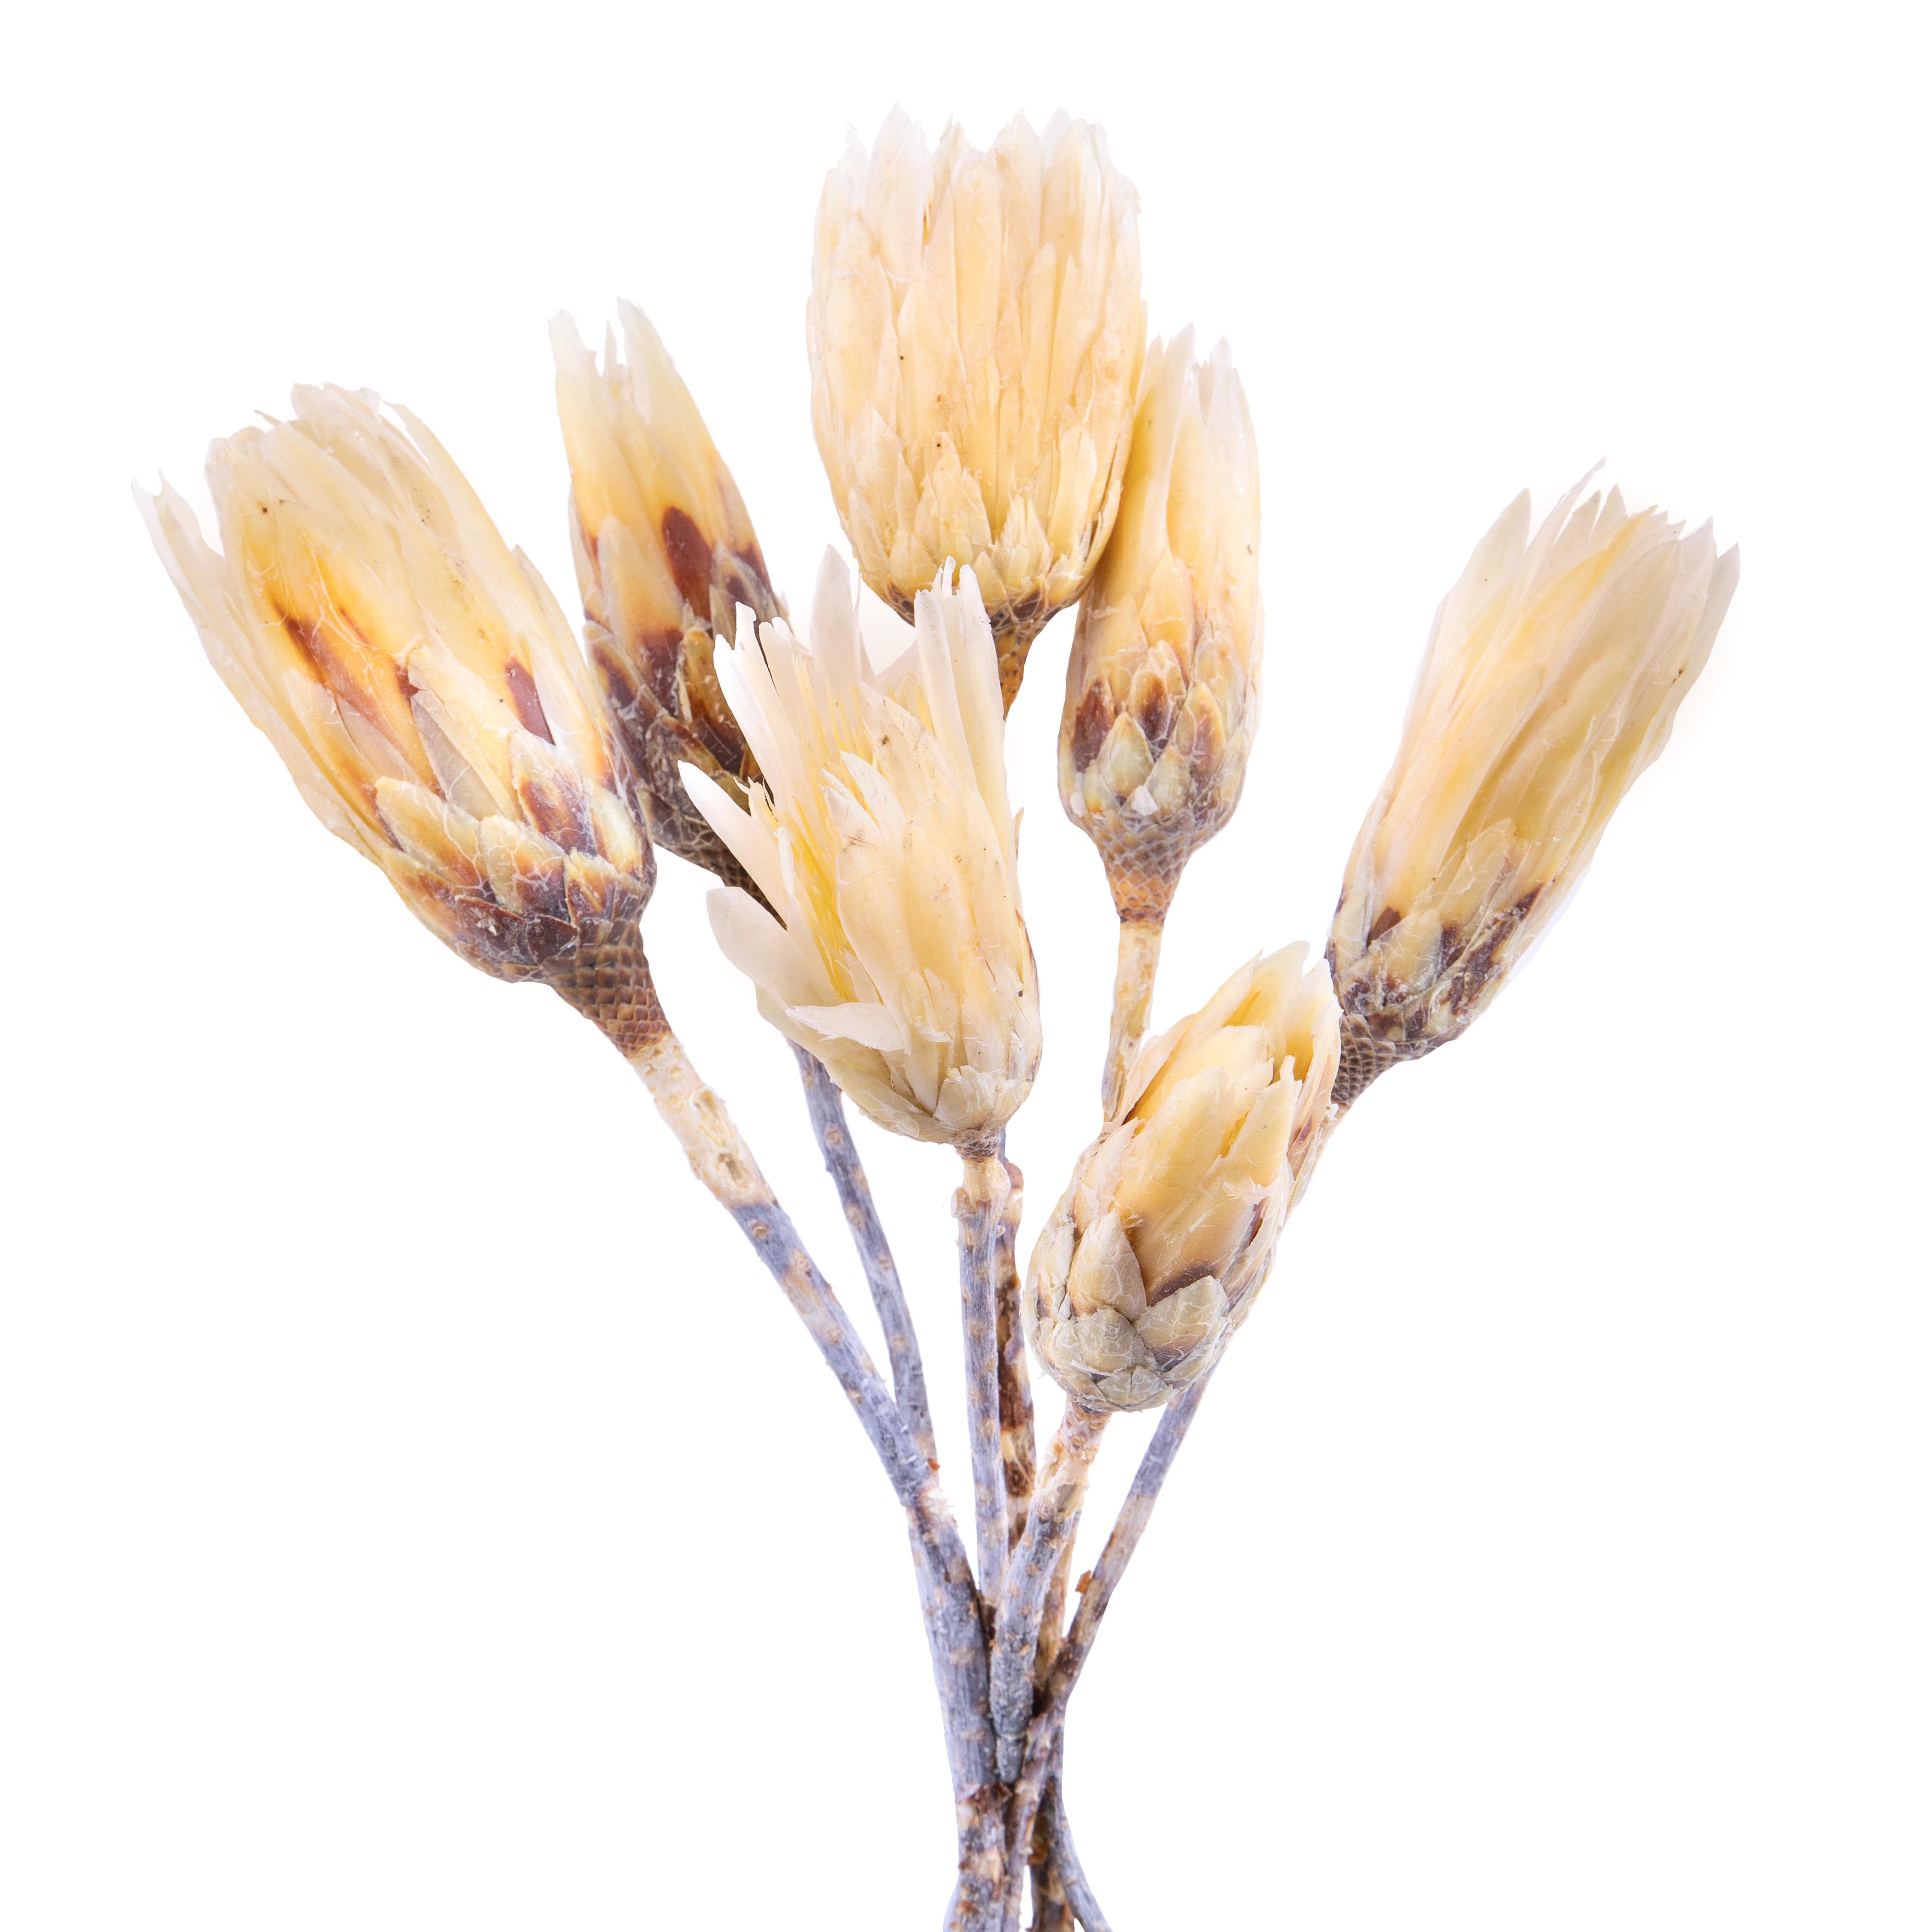 NATURAL PRODUCTS DRIED FLOWERS AND ERBS, FLOWERS, FRUITS AND NATURAL PROTEES, REPENS NAT. 1 PZ 30 CM SBIANCATA